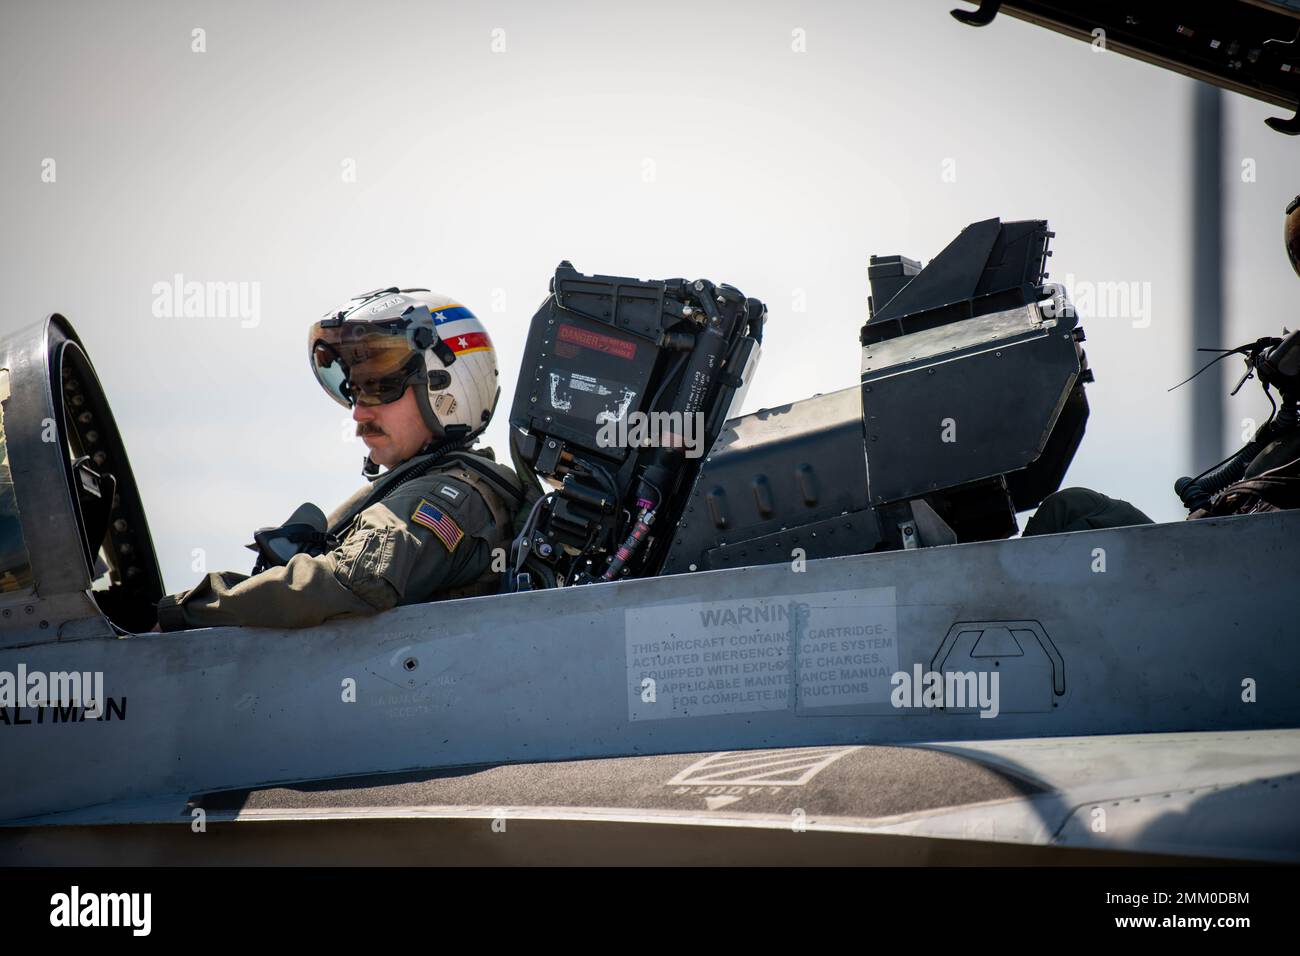 A U.S. Navy pilot assigned to the Strike Fighter Squadron (VFA) 2, Naval Air Station Lemoore, California, taxis during Weapons System Evaluation Program-East 22.12 at Tyndall Air Force Base, Florida, Sept. 12, 2022. WSEP-E 22.12 is a formal, two-week evaluation exercise designed to test a squadron’s capabilities to conduct live-fire weapons systems during air-to-air combat training missions. Stock Photo